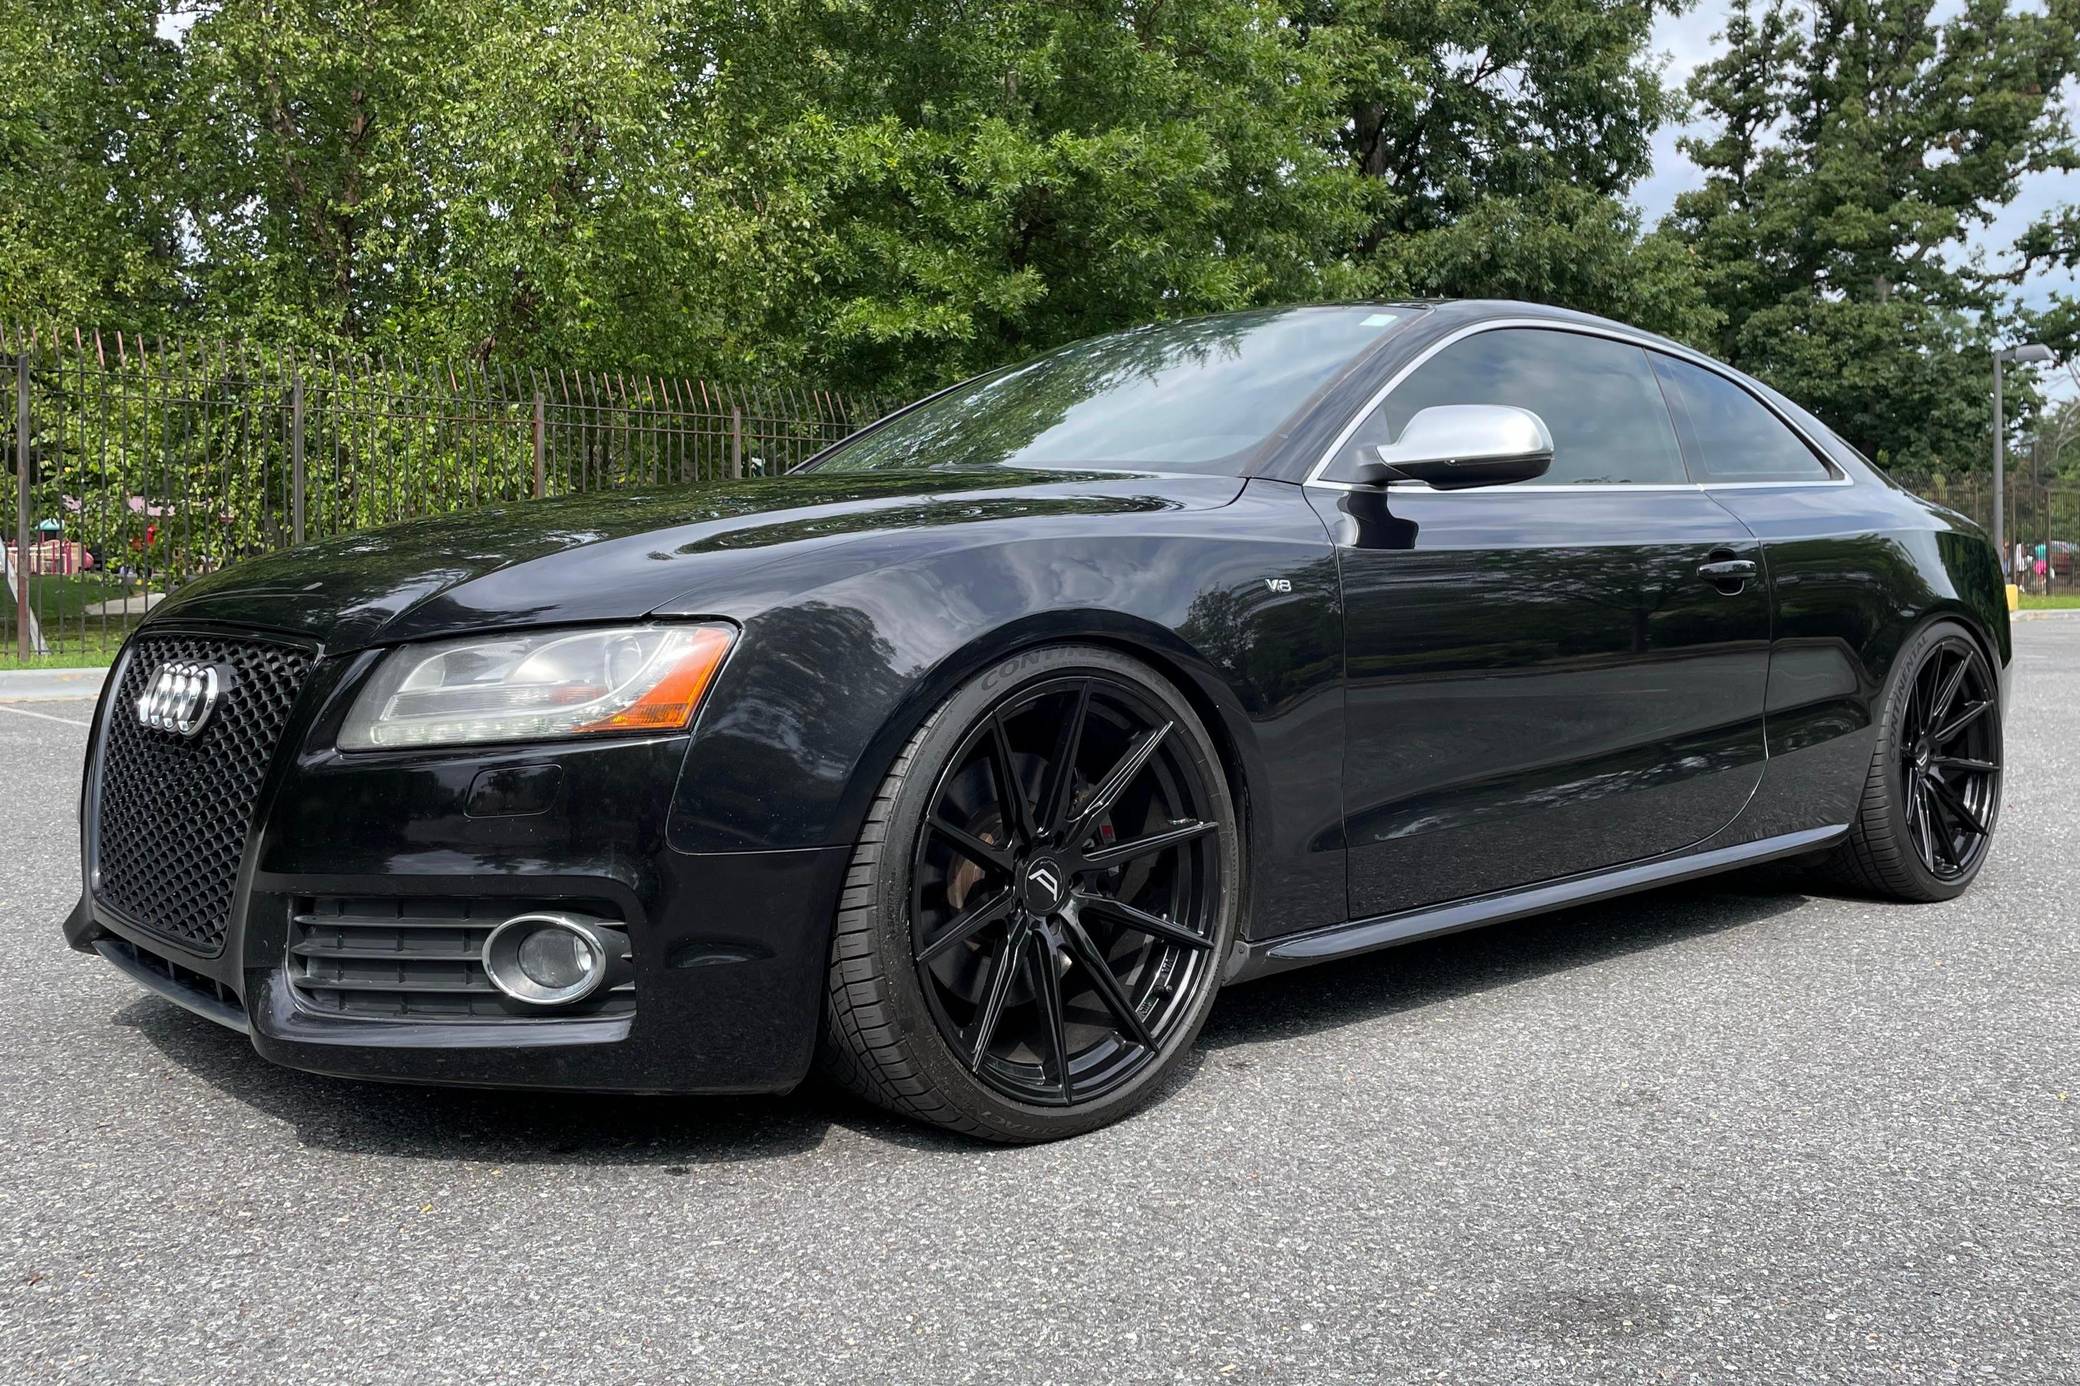 AUDI A5 audi-s5-v8-fl-tuning Used - the parking